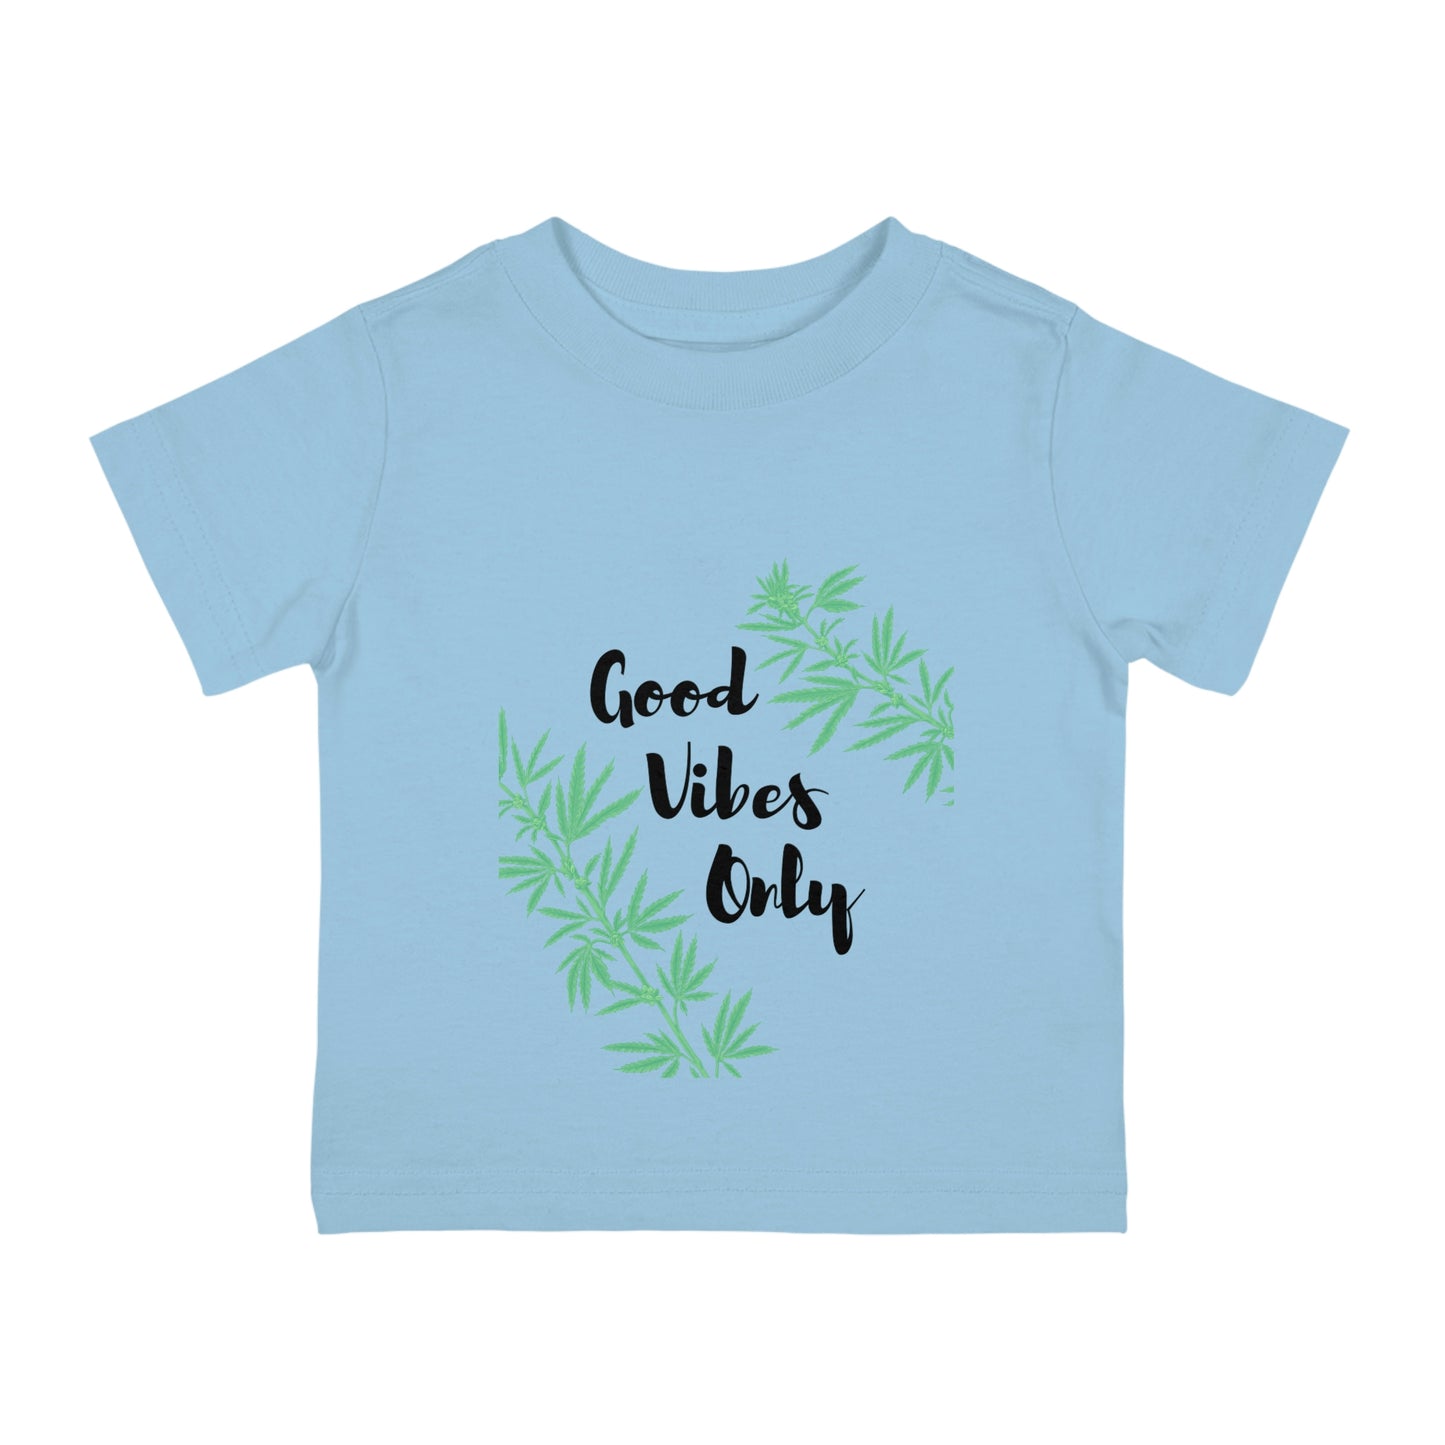 Good Vibes Only Infant Jersey Tee baby t-shirt.